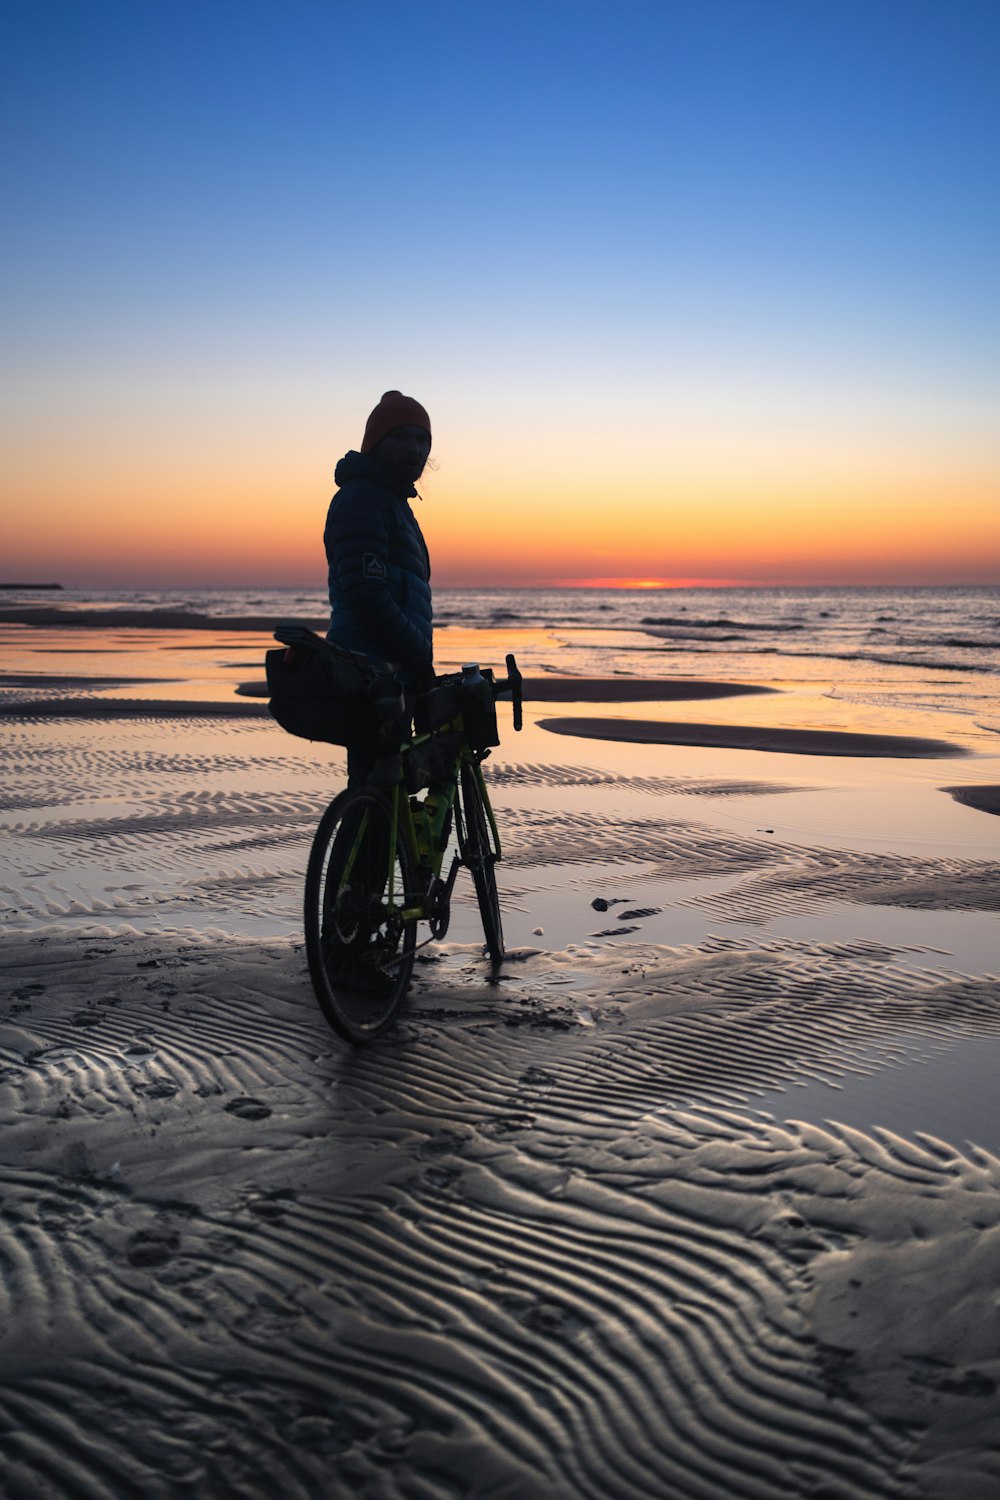 a person riding a bike on a beach at sunset